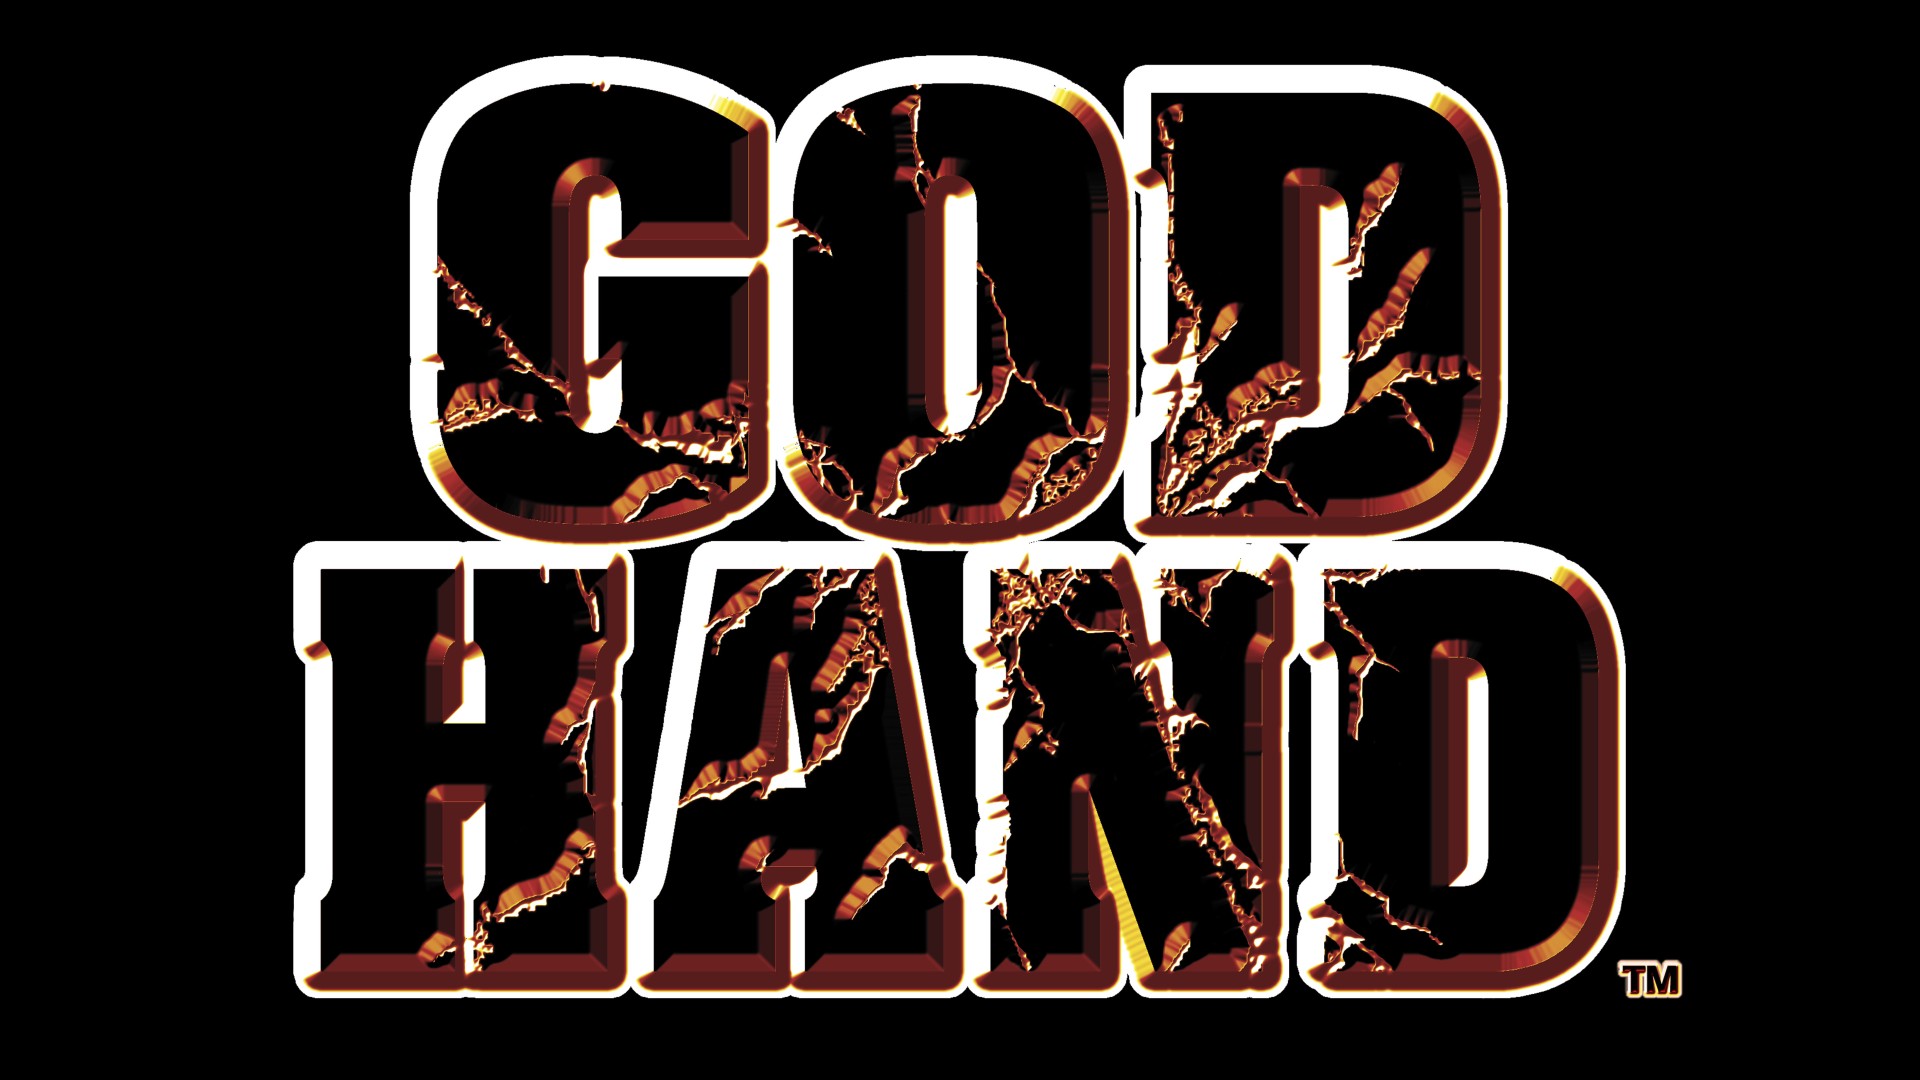 Video Game God Hand 1920x1080